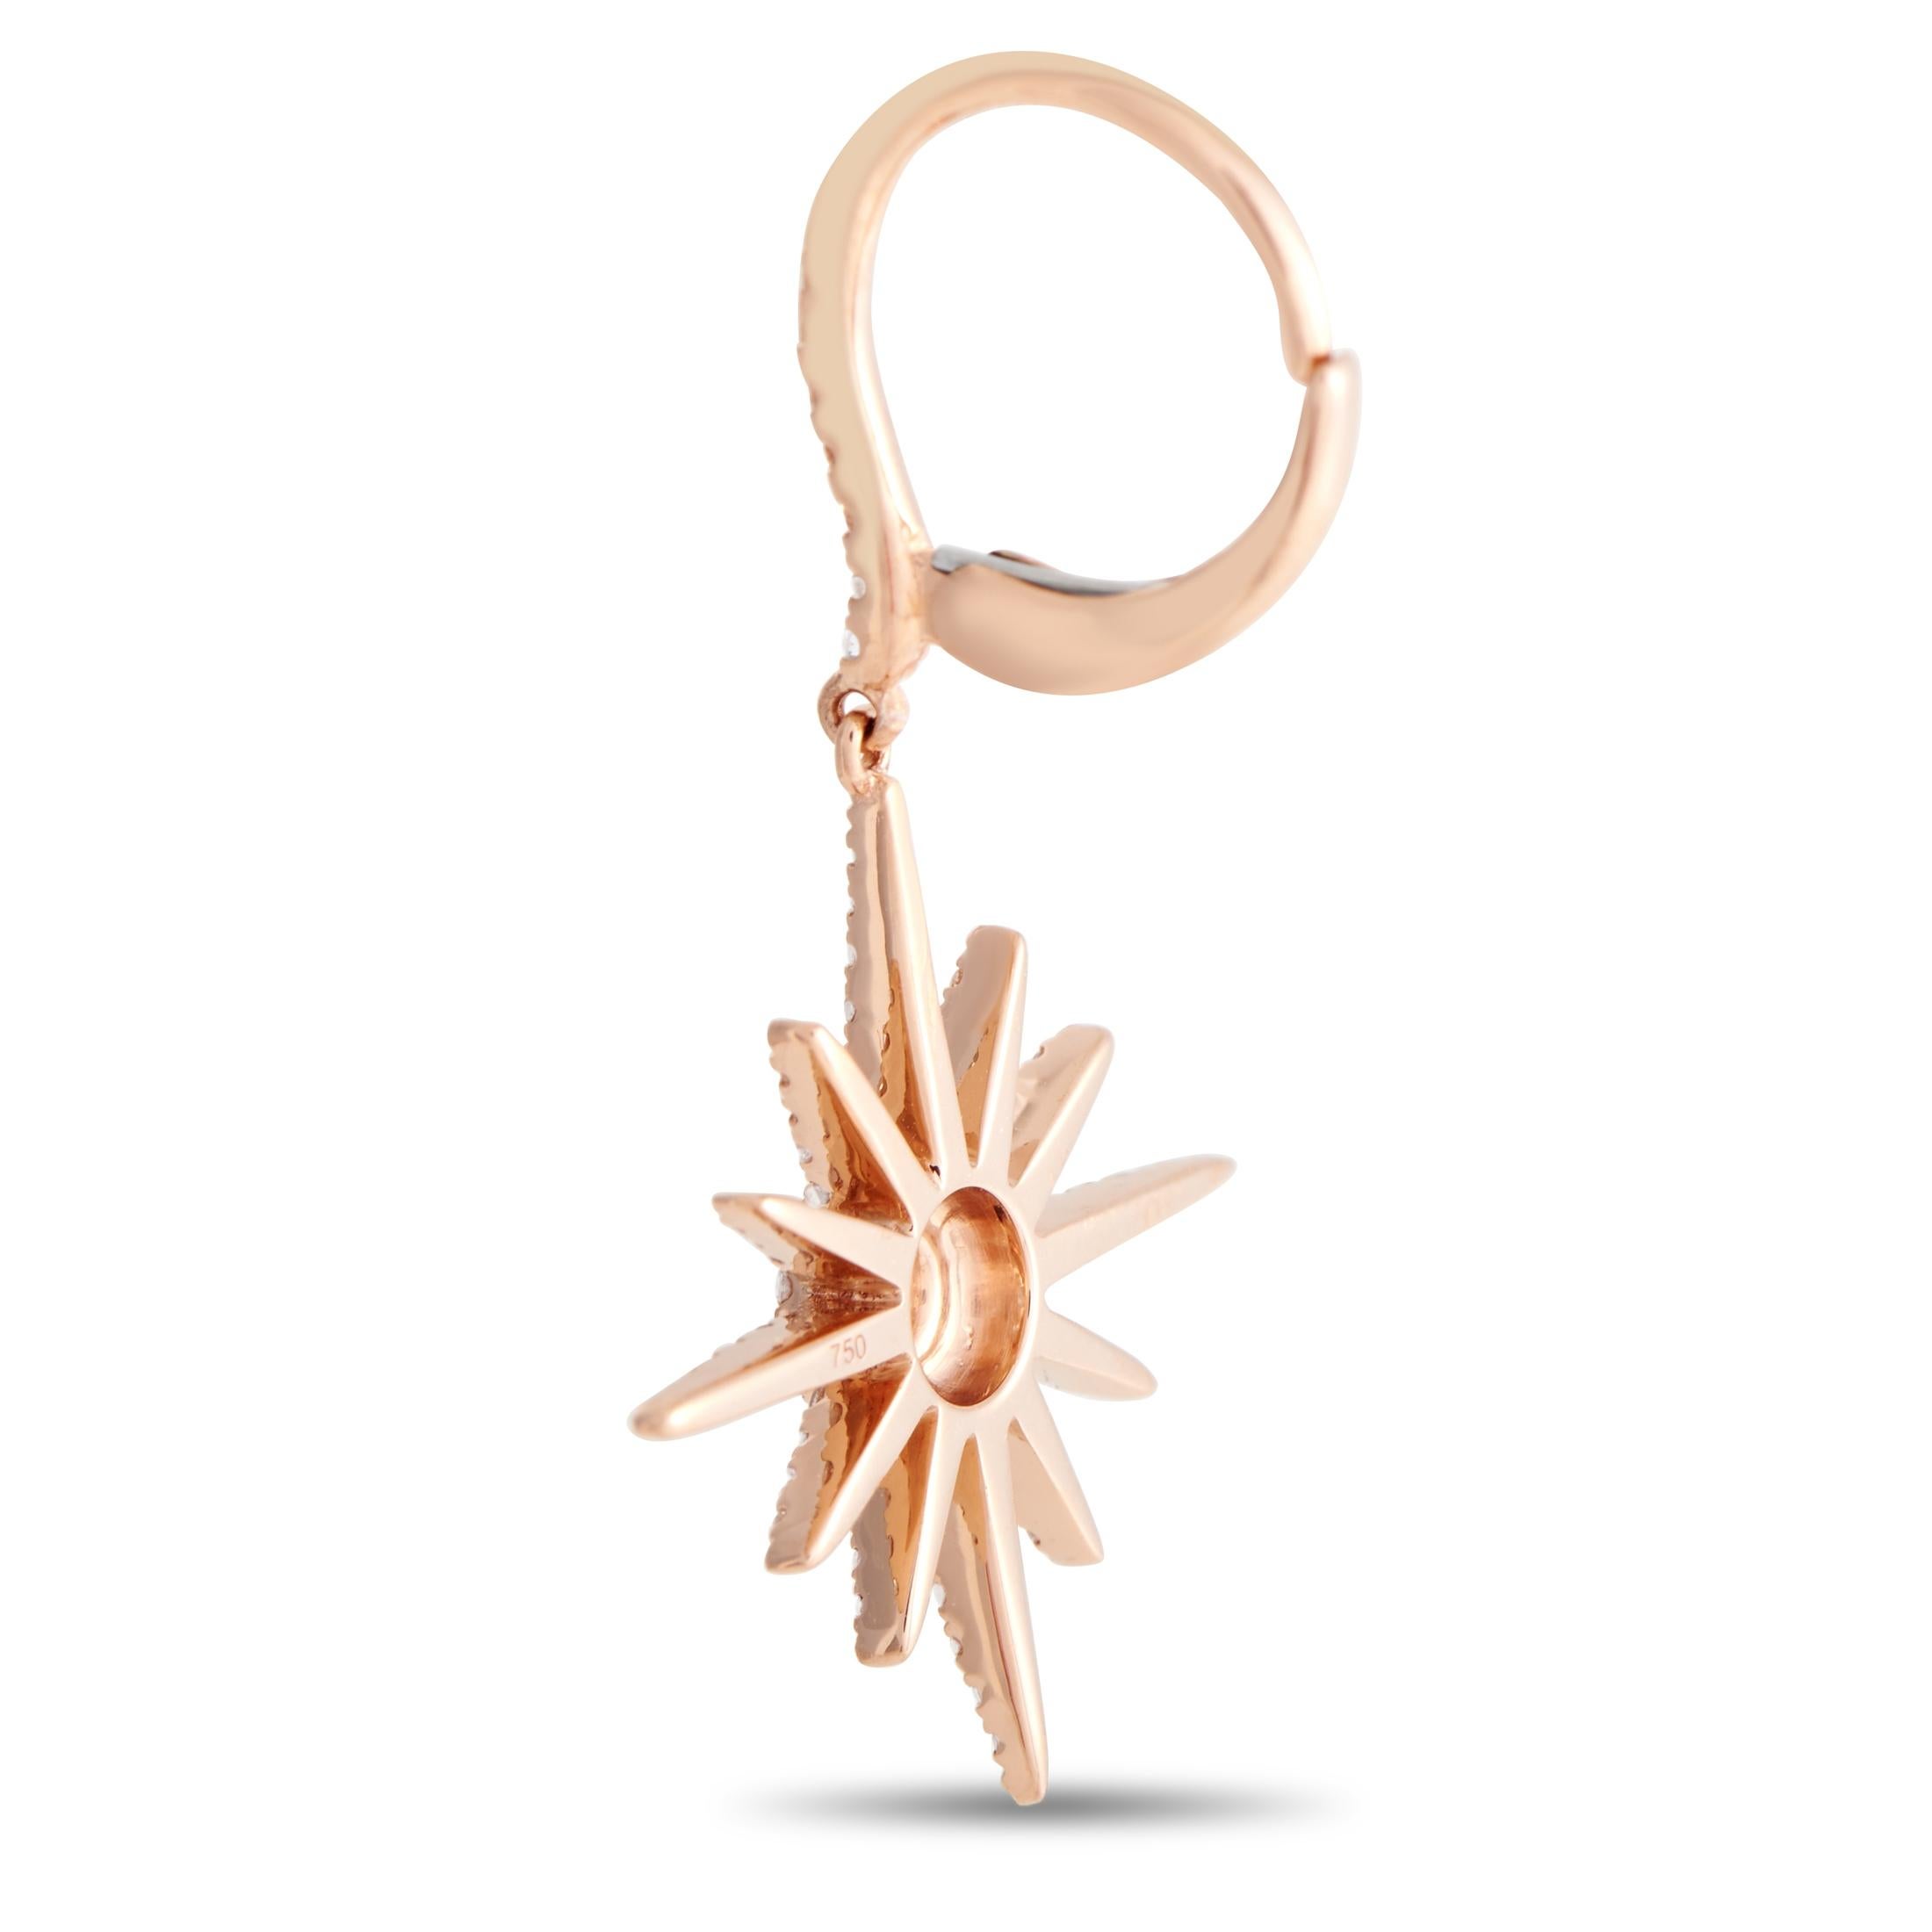 A stunning starburst motif makes these dazzling earrings the perfect addition to any special ensemble. Diamonds with a total weight of 0.60 carats allow them to effortlessly emanate light. Crafted from 18K rose gold, each one measures 1.25” long and